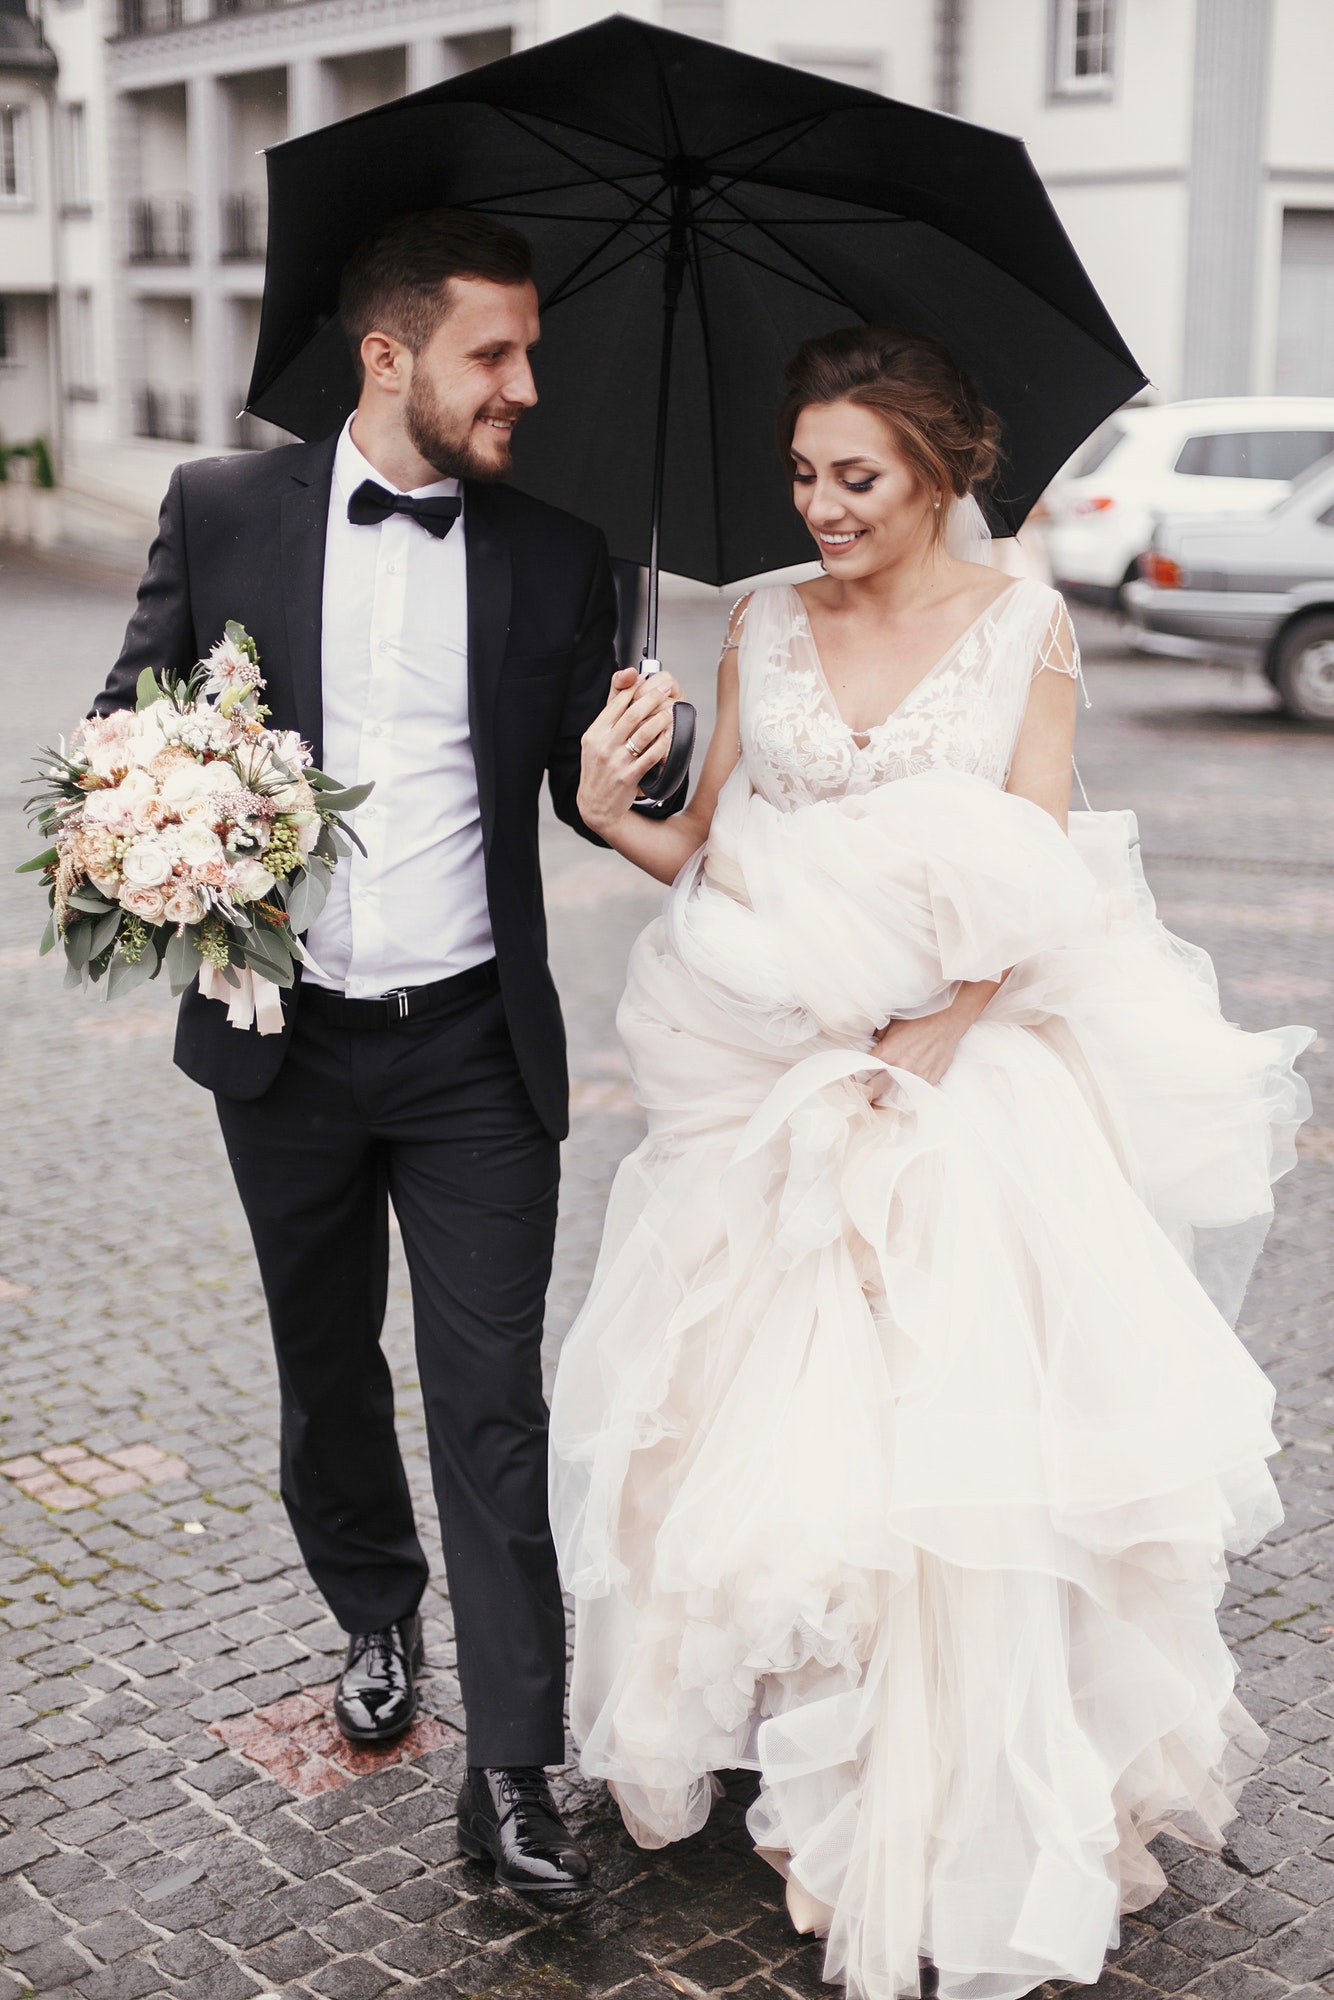 gorgeous-bride-and-stylish-groom-walking-under-umbrella-in-rainy-street-and-smiling.jpg